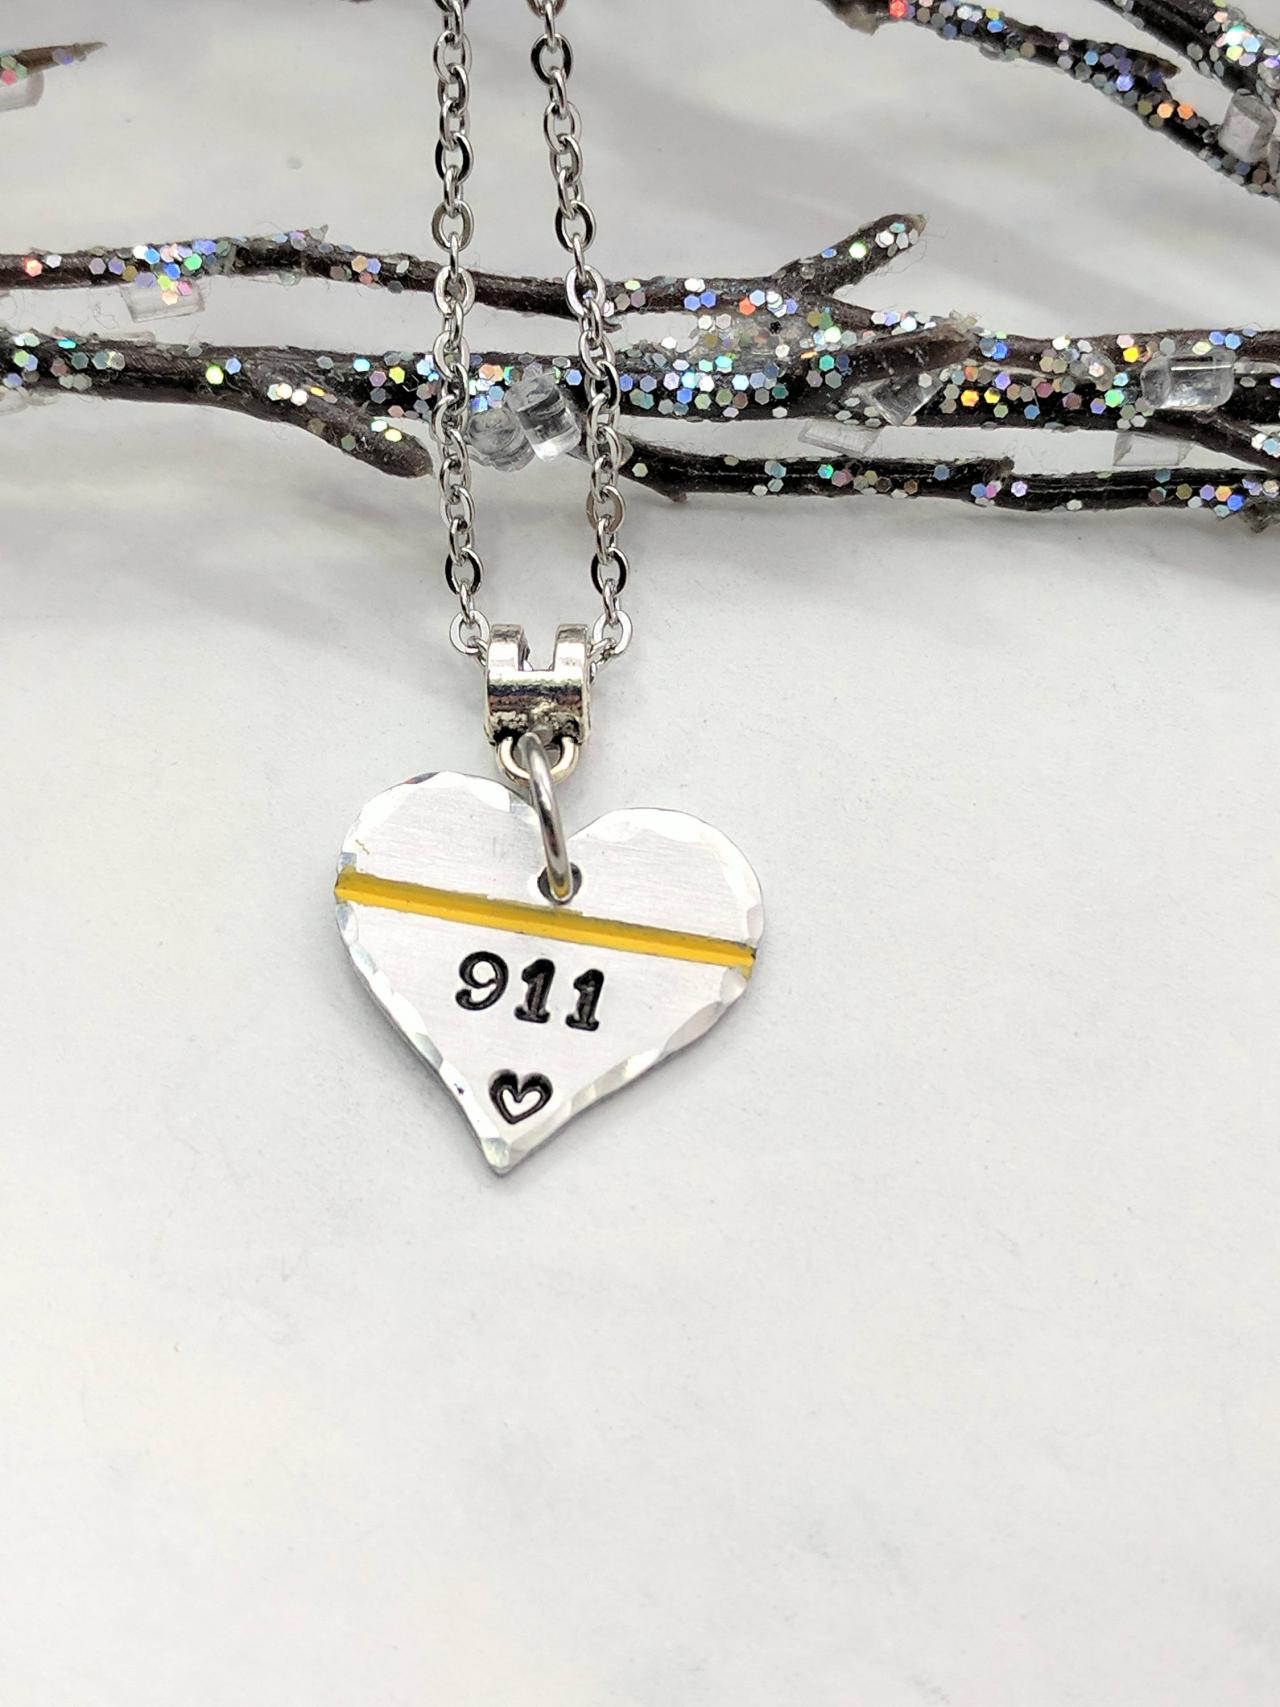 Hand Stamped Necklace - 911 Dispatcher Jewelry - 911 Operator Necklace - Hand Stamped Jewelry - Thin Gold Line - Dispatcher Gift - Police